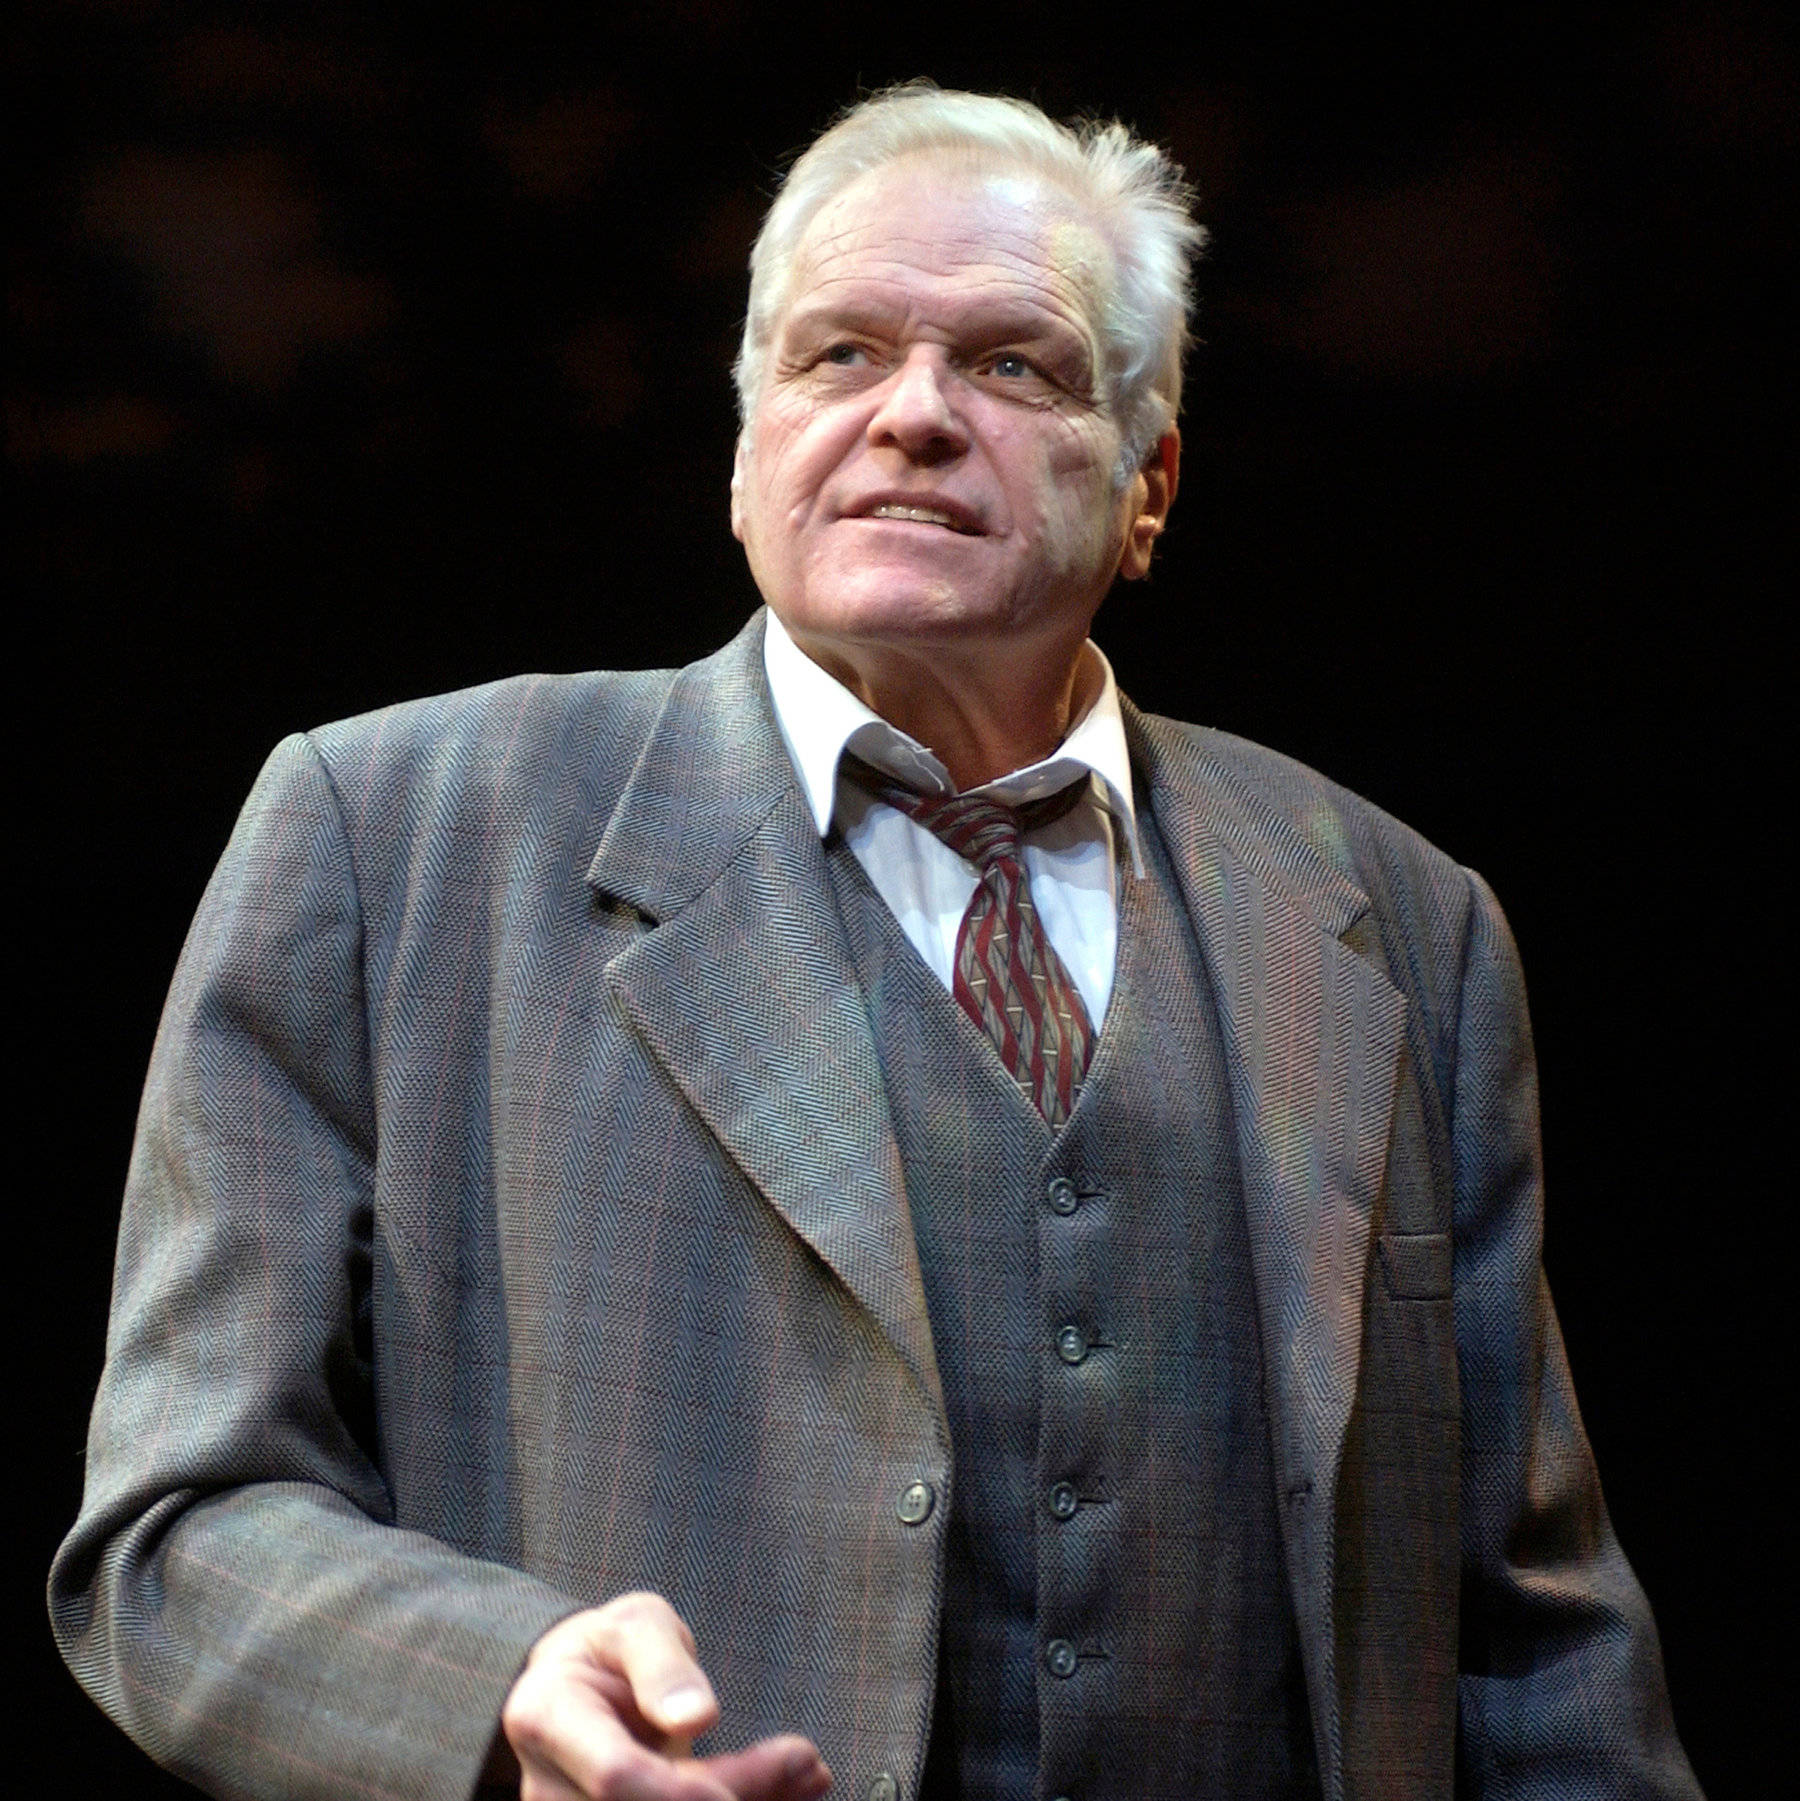 Brian Dennehy Suit And Trenchcoat On Black Wallpaper